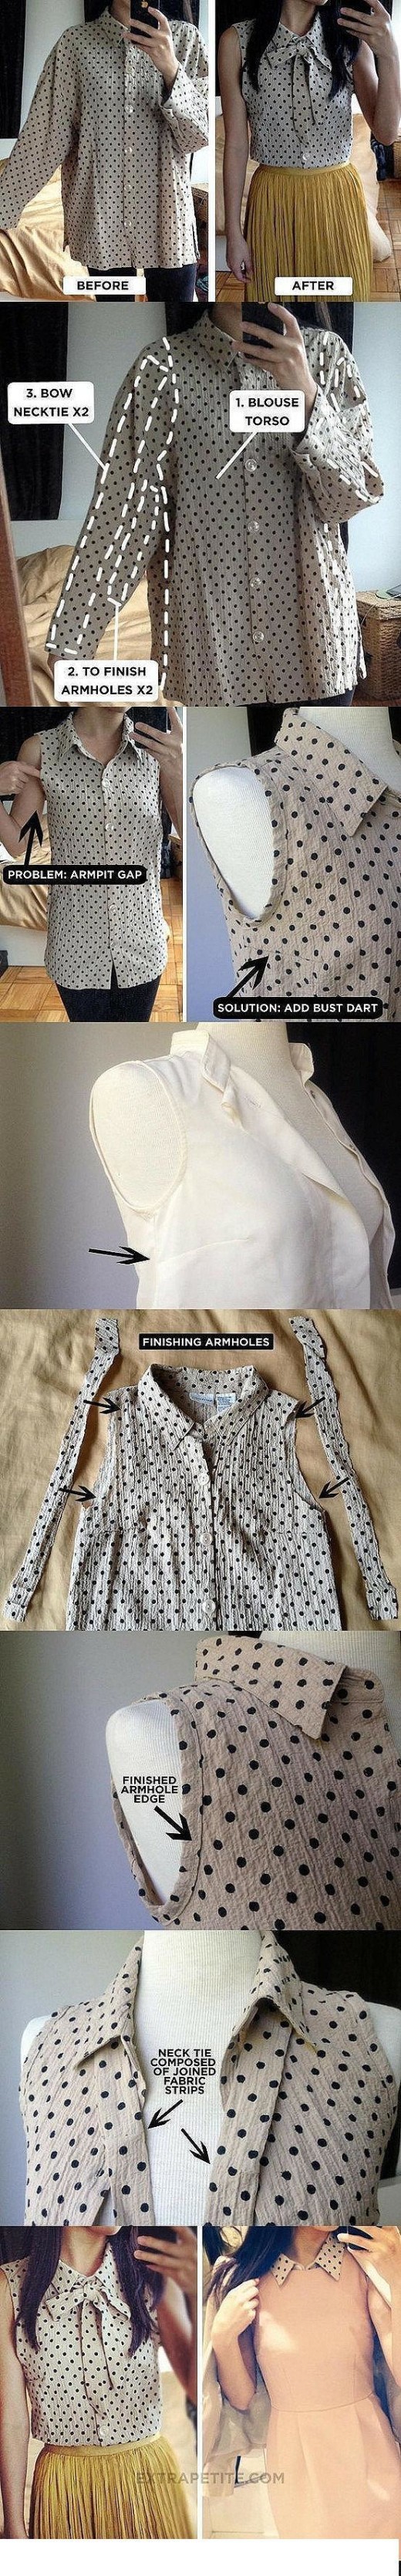 Reuse of old clothes